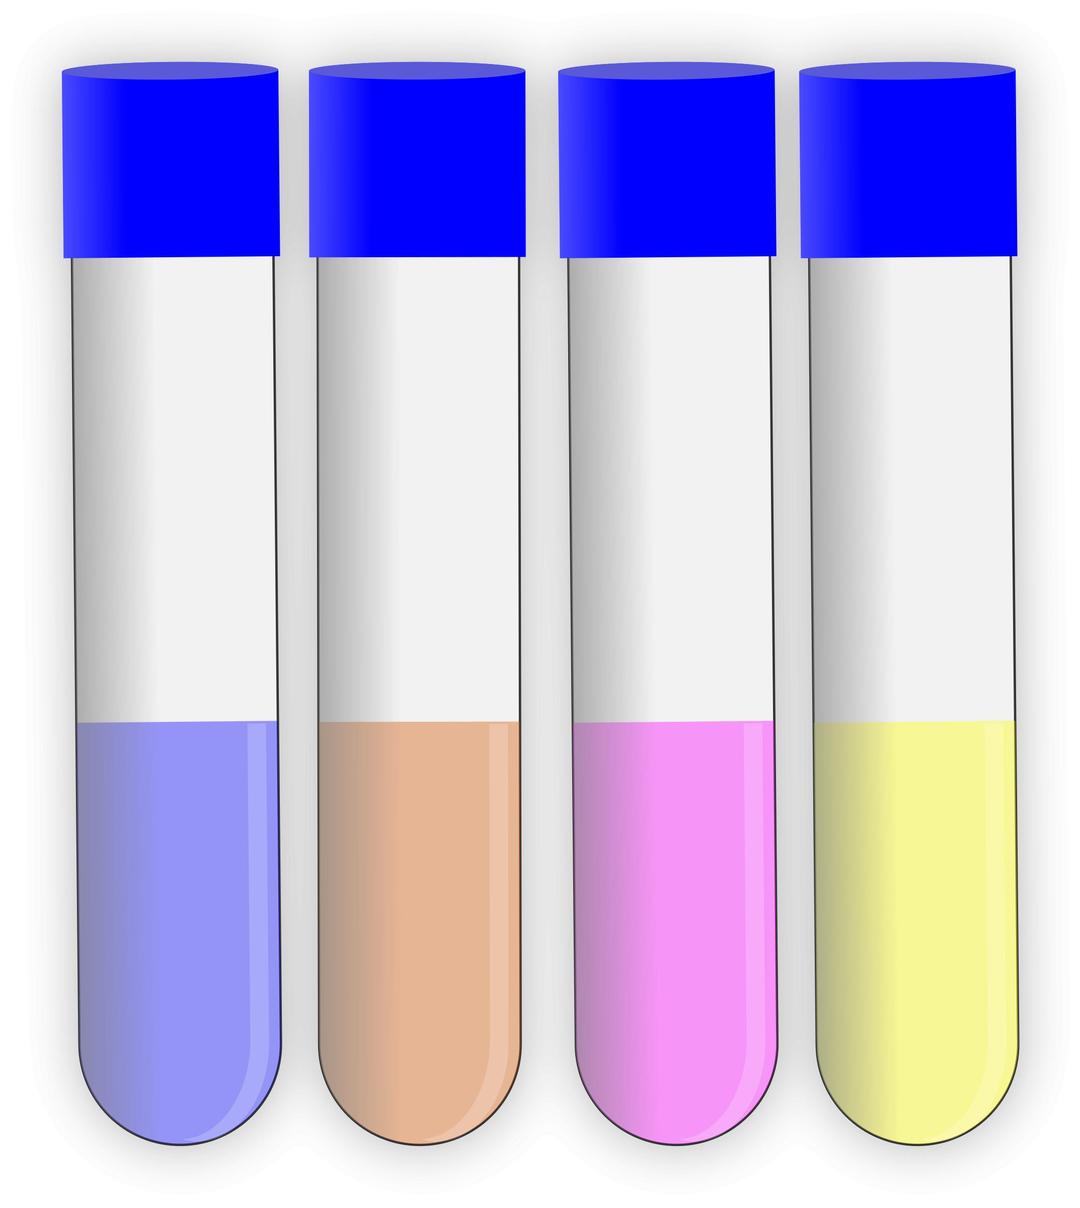 Test Tubes (With Caps) png transparent